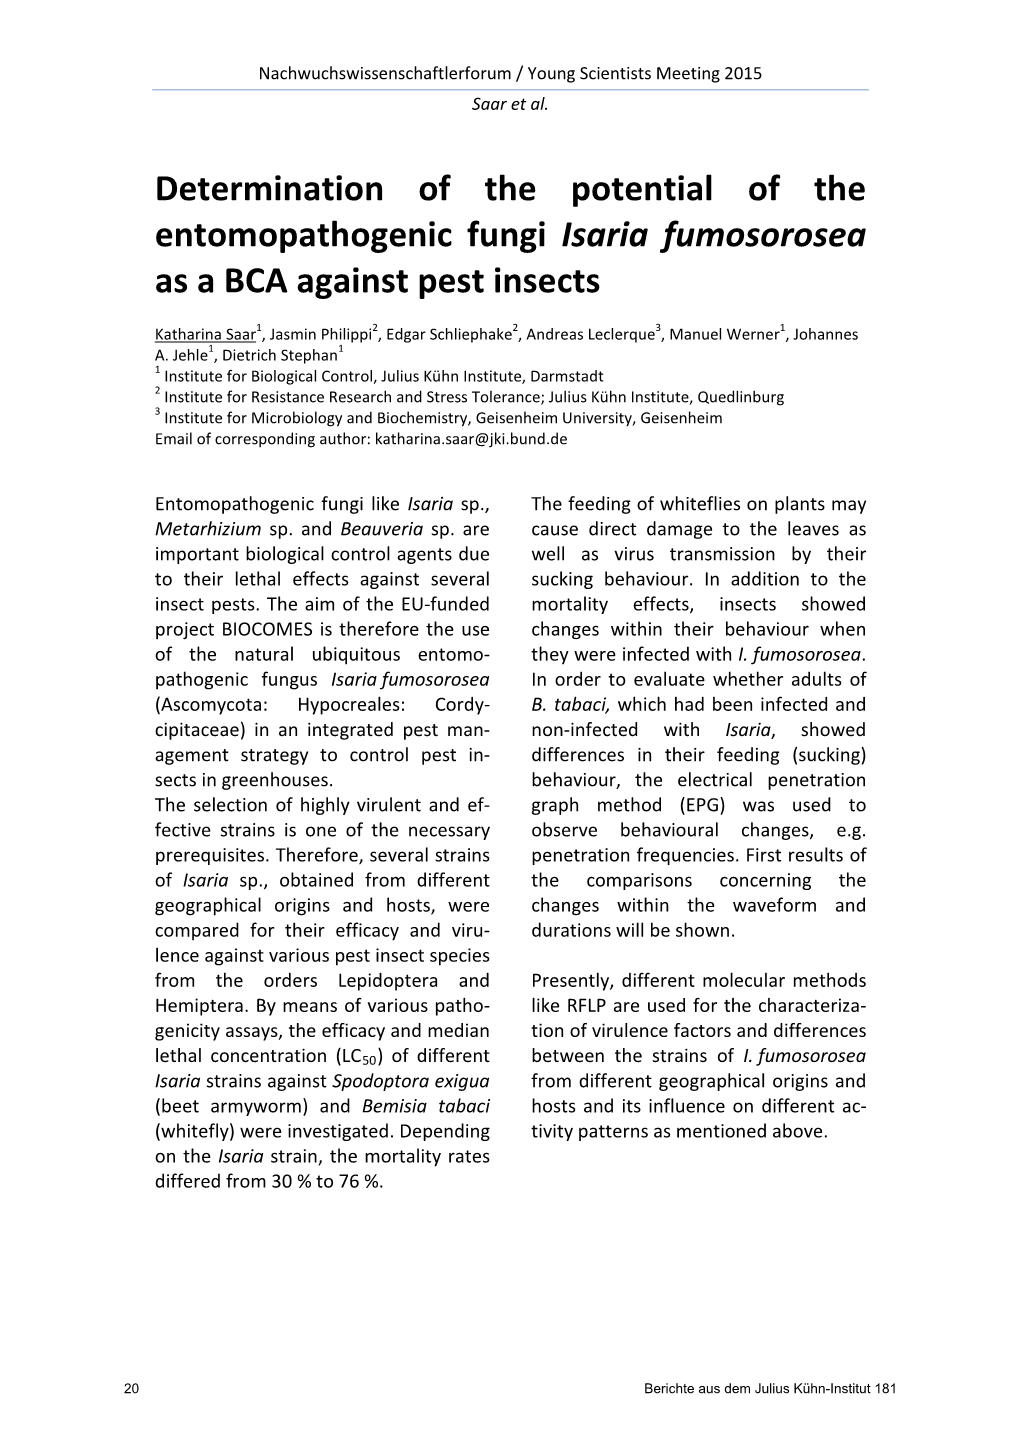 Determination of the Potential of the Entomopathogenic Fungi Isaria Fumosorosea As a BCA Against Pest Insects